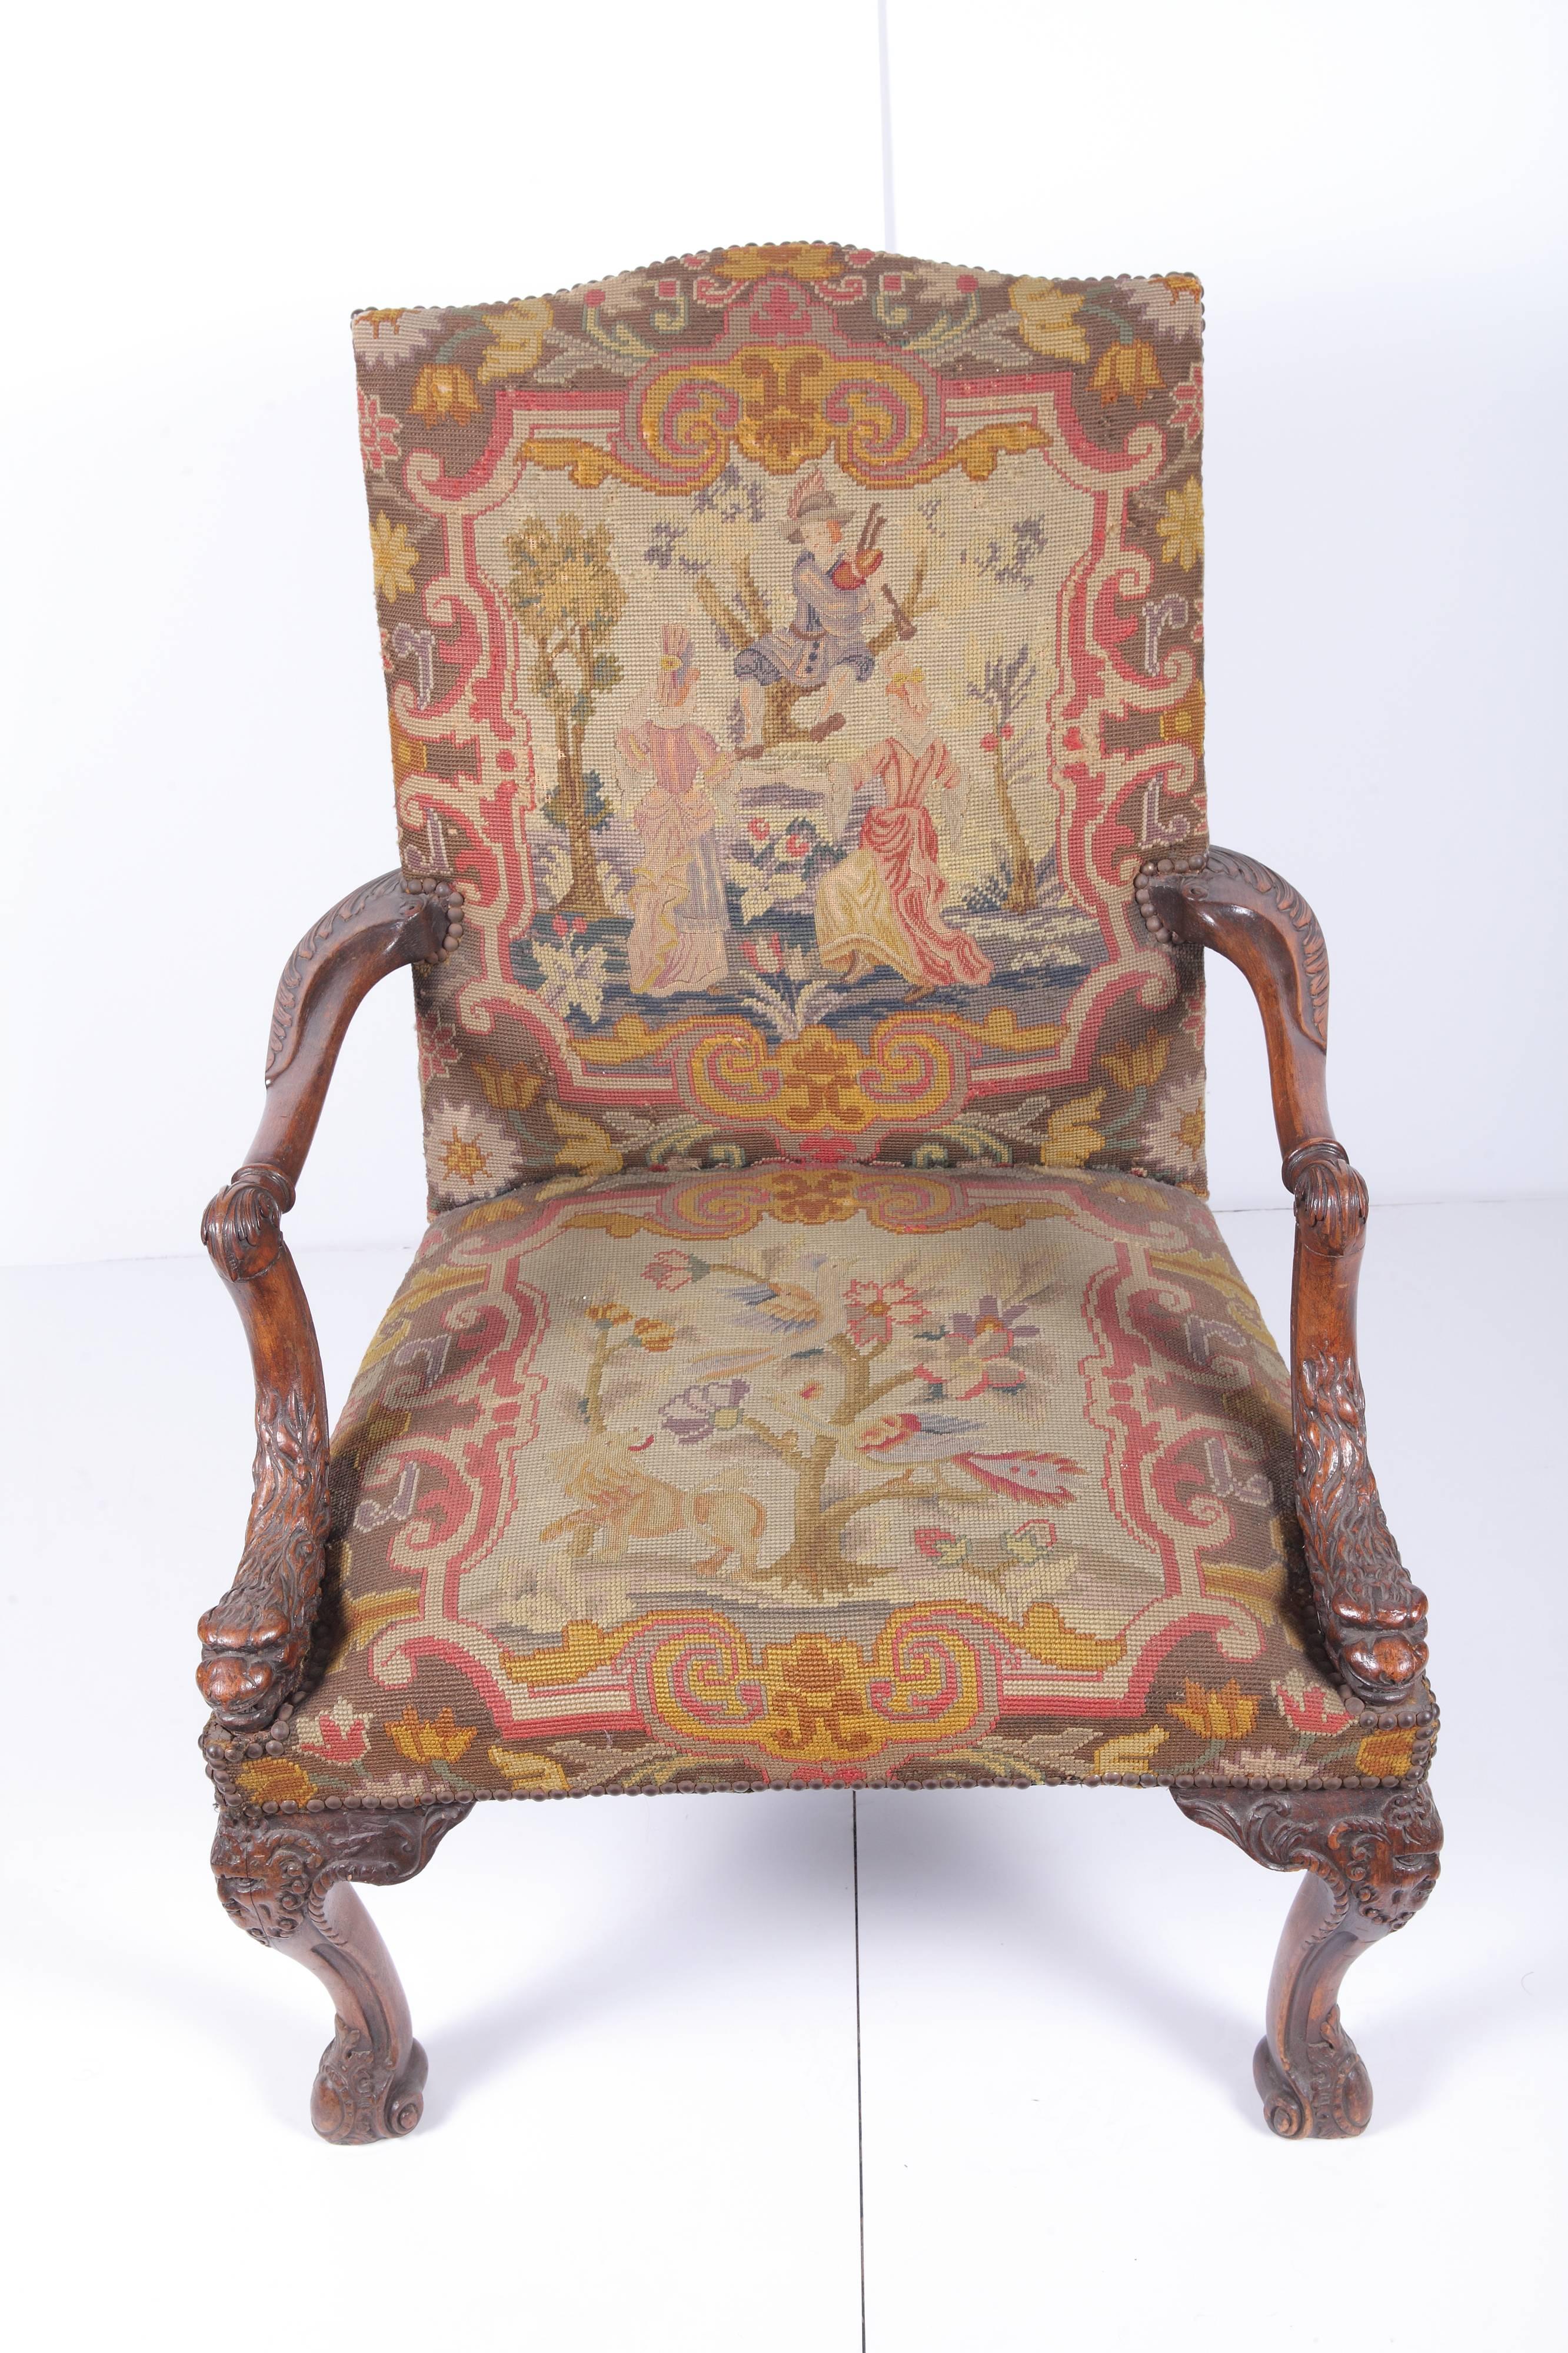 Early 19th century Gainsborough style armchair having serpentine-topped upholstered back and lion's head carved set-back arms above a seat supported on carved cabriole legs with masks on the knees.